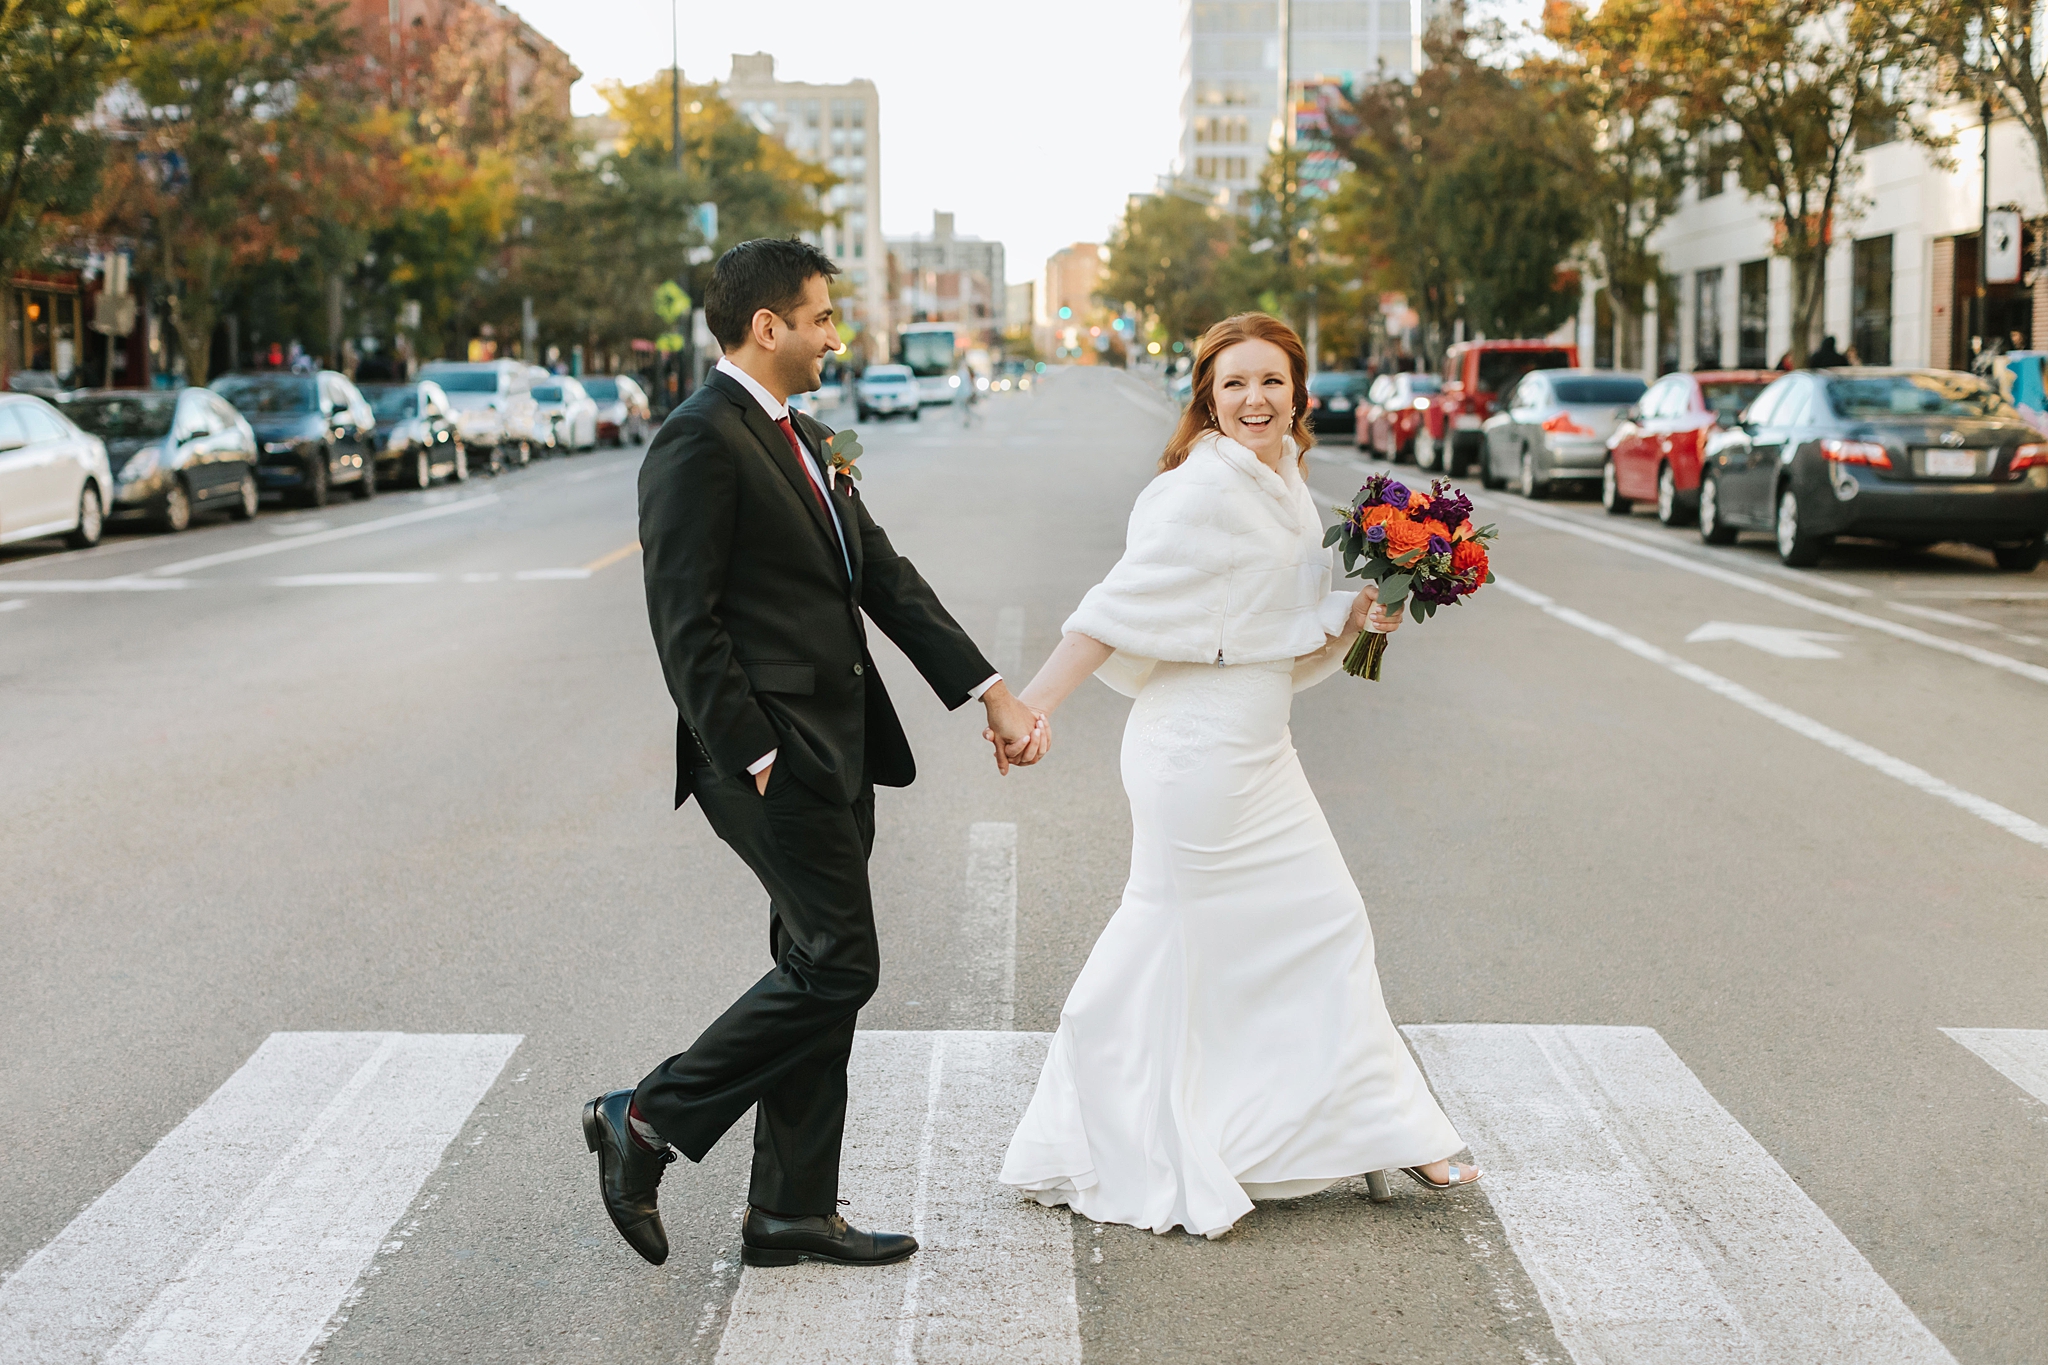 Shannon and Rimal walking across the street on wedding day